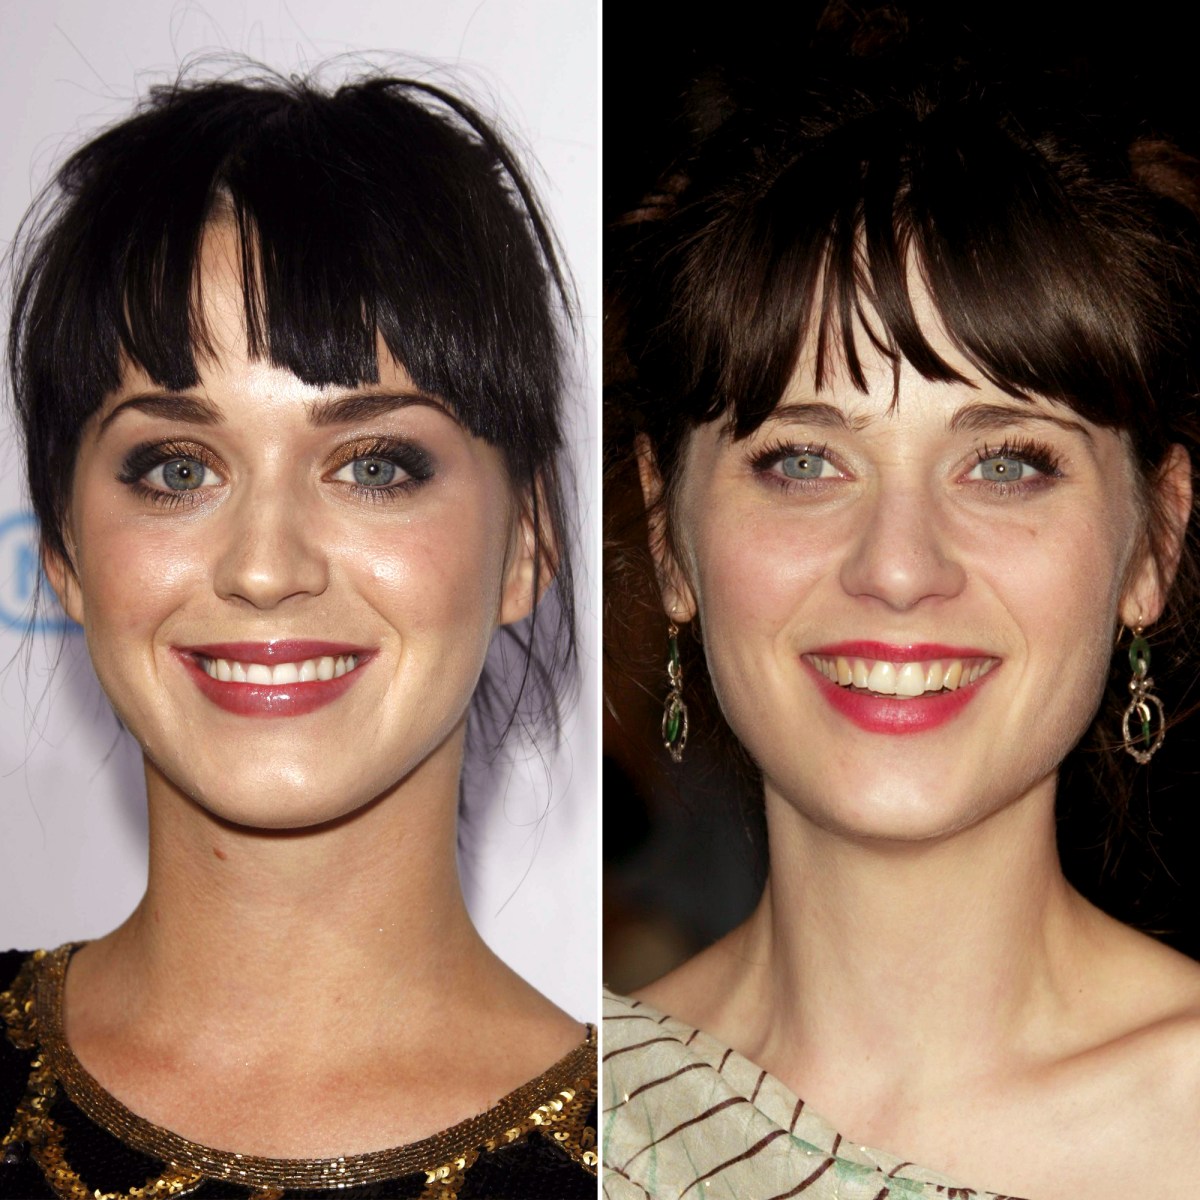 Celebrity Doppelgangers: See Photos of Stars Who Look Alike